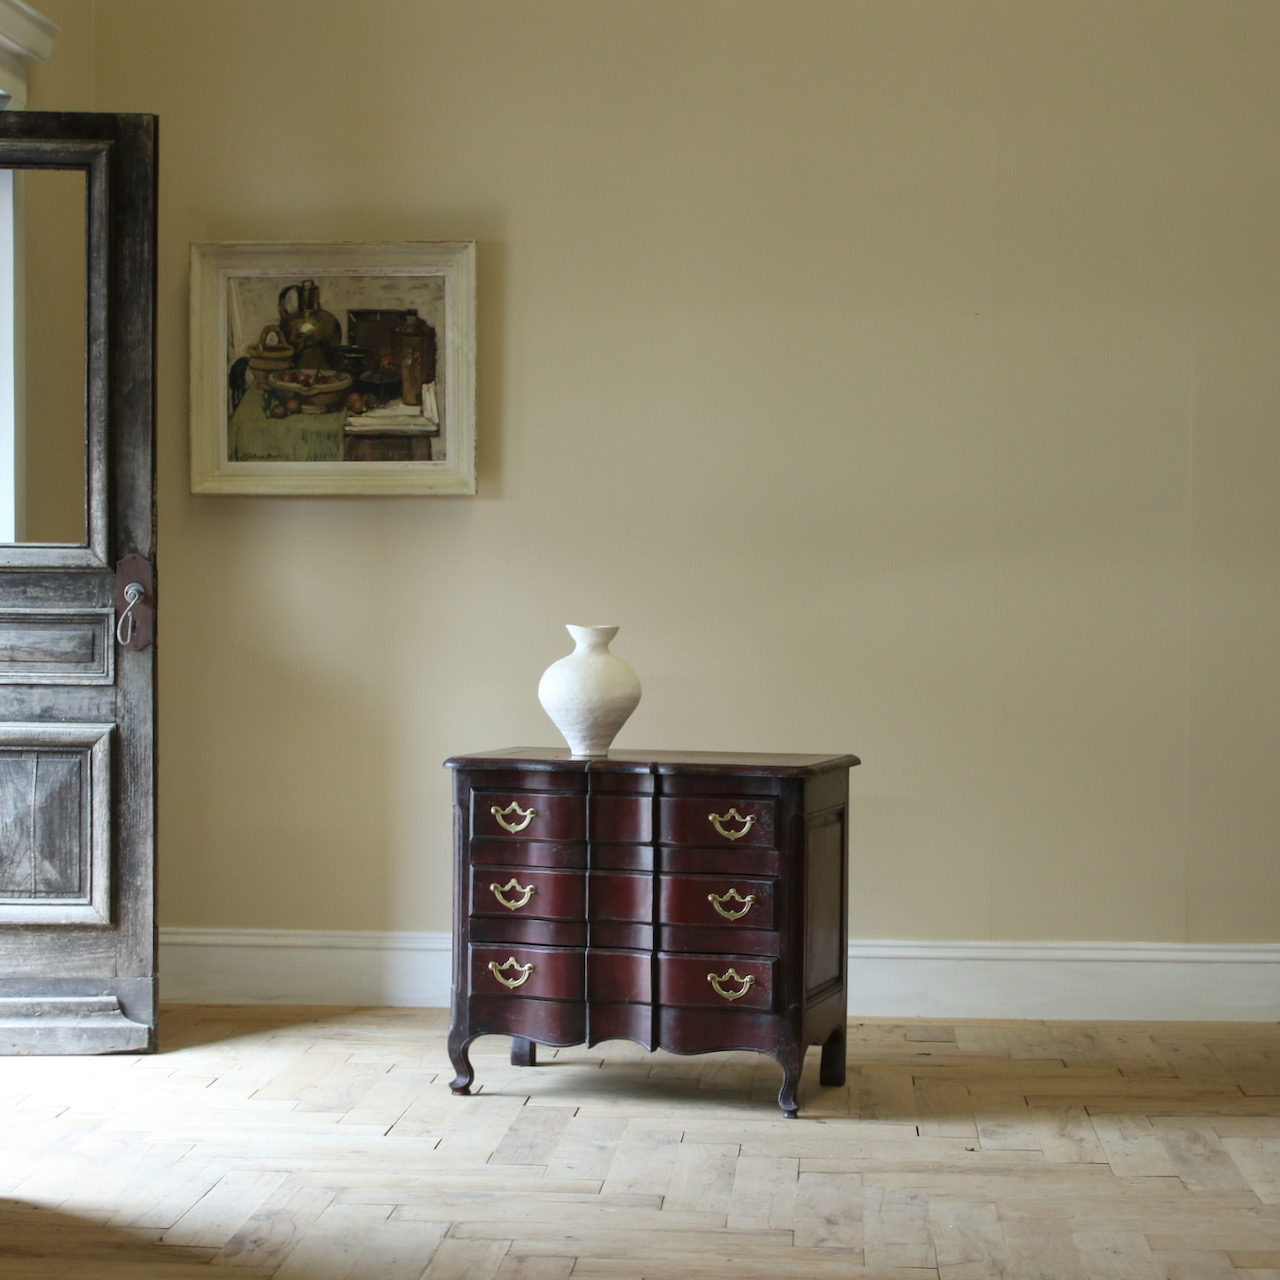 134-24 - A Gustavian Serpentine-Fronted Commode